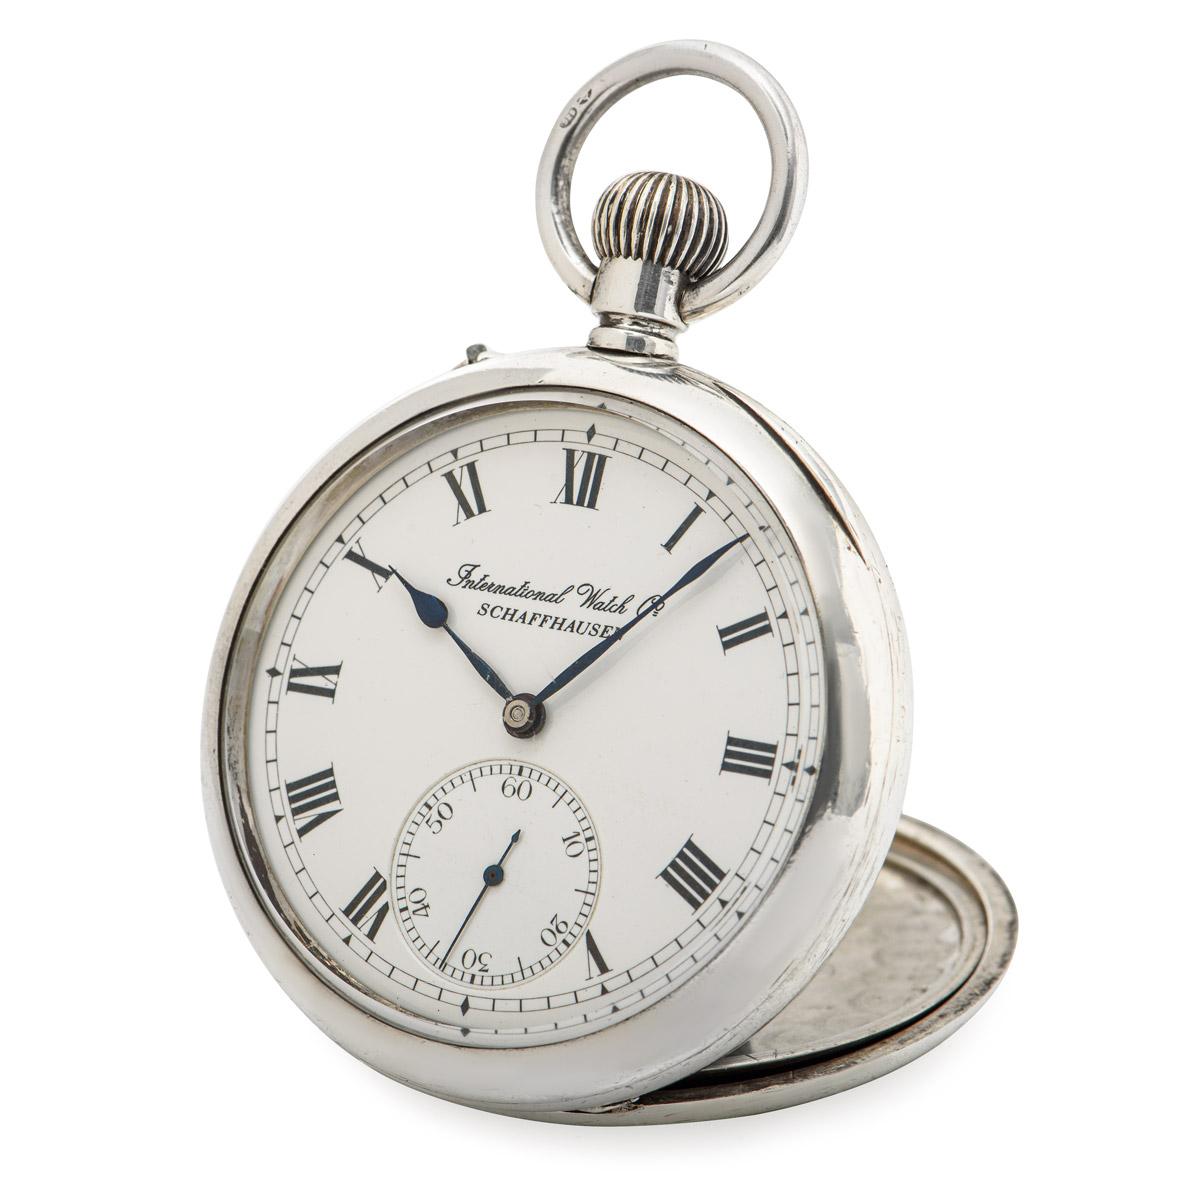 IWC a very rare fishtail keyless lever open face silver pocket watch, C1915 with it's original box.

Dial: The perfect white enamel Roman dial with subsidiary seconds dial fully signed International Watch Company Schaffhausen.

Case: The beautiful